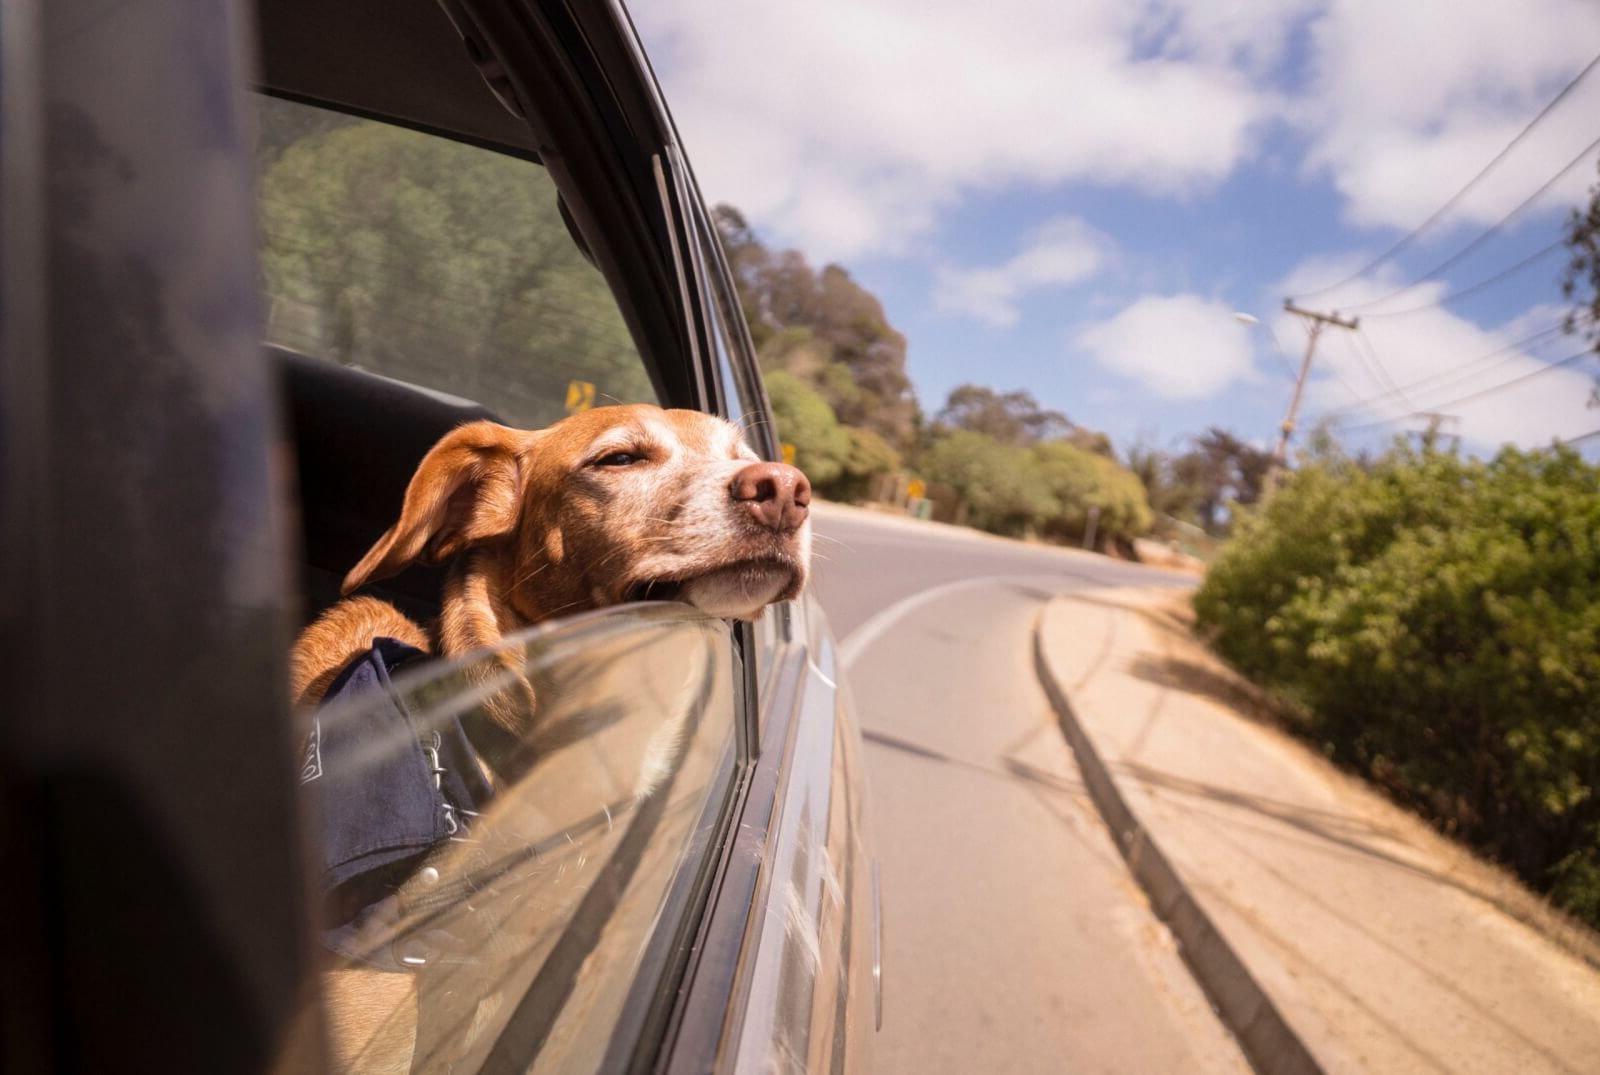 A small dog bathes in sunlight from a car window